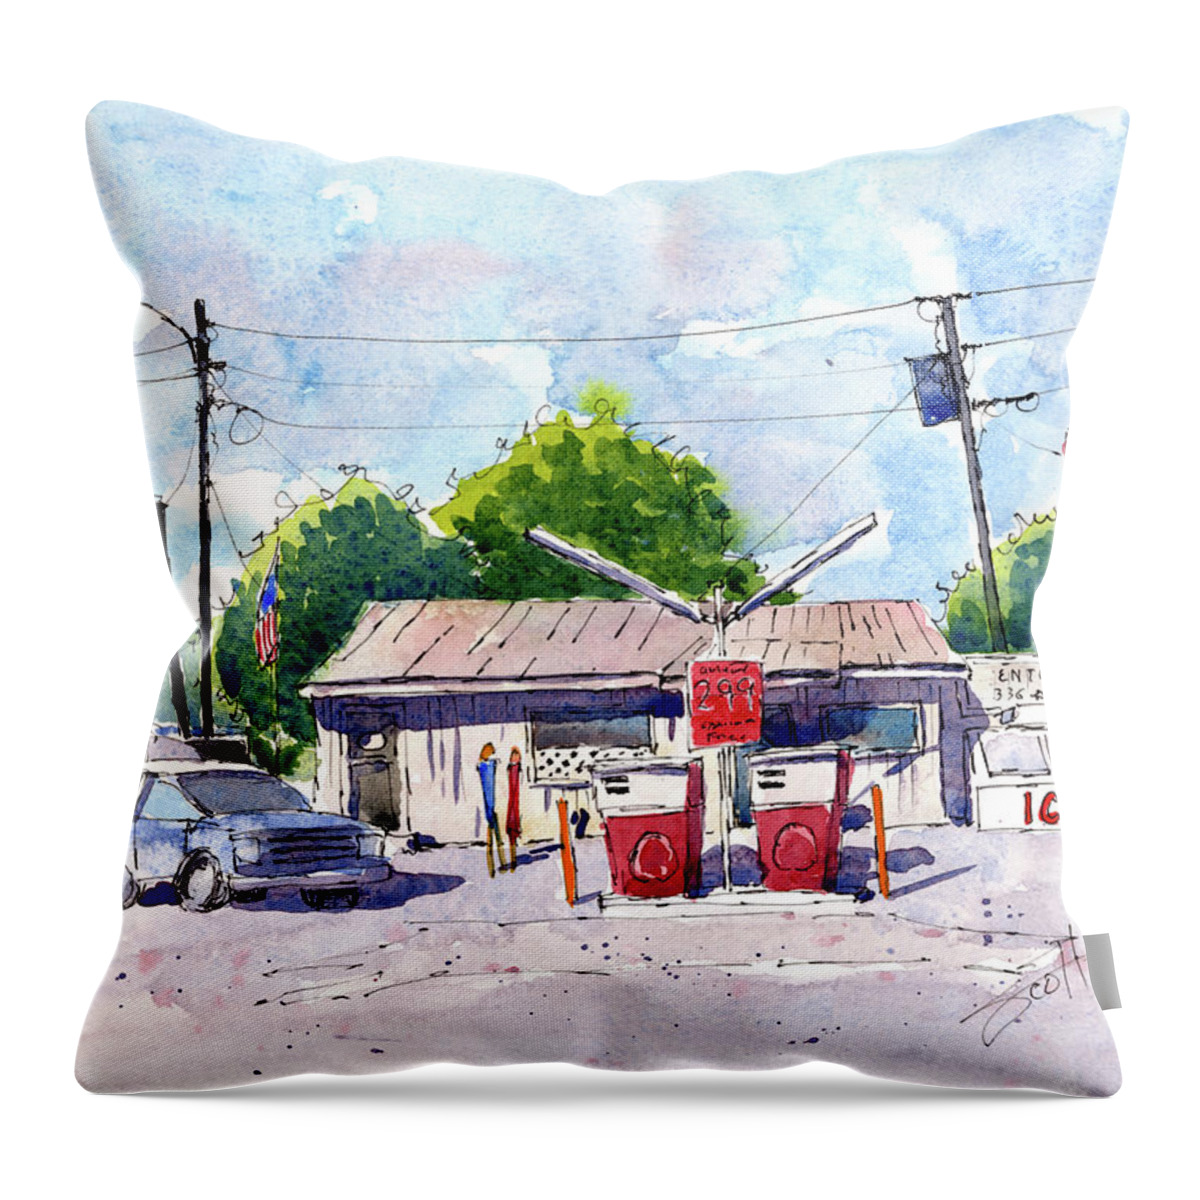 Watercolor Throw Pillow featuring the painting Speegle's Marina by Scott Brown